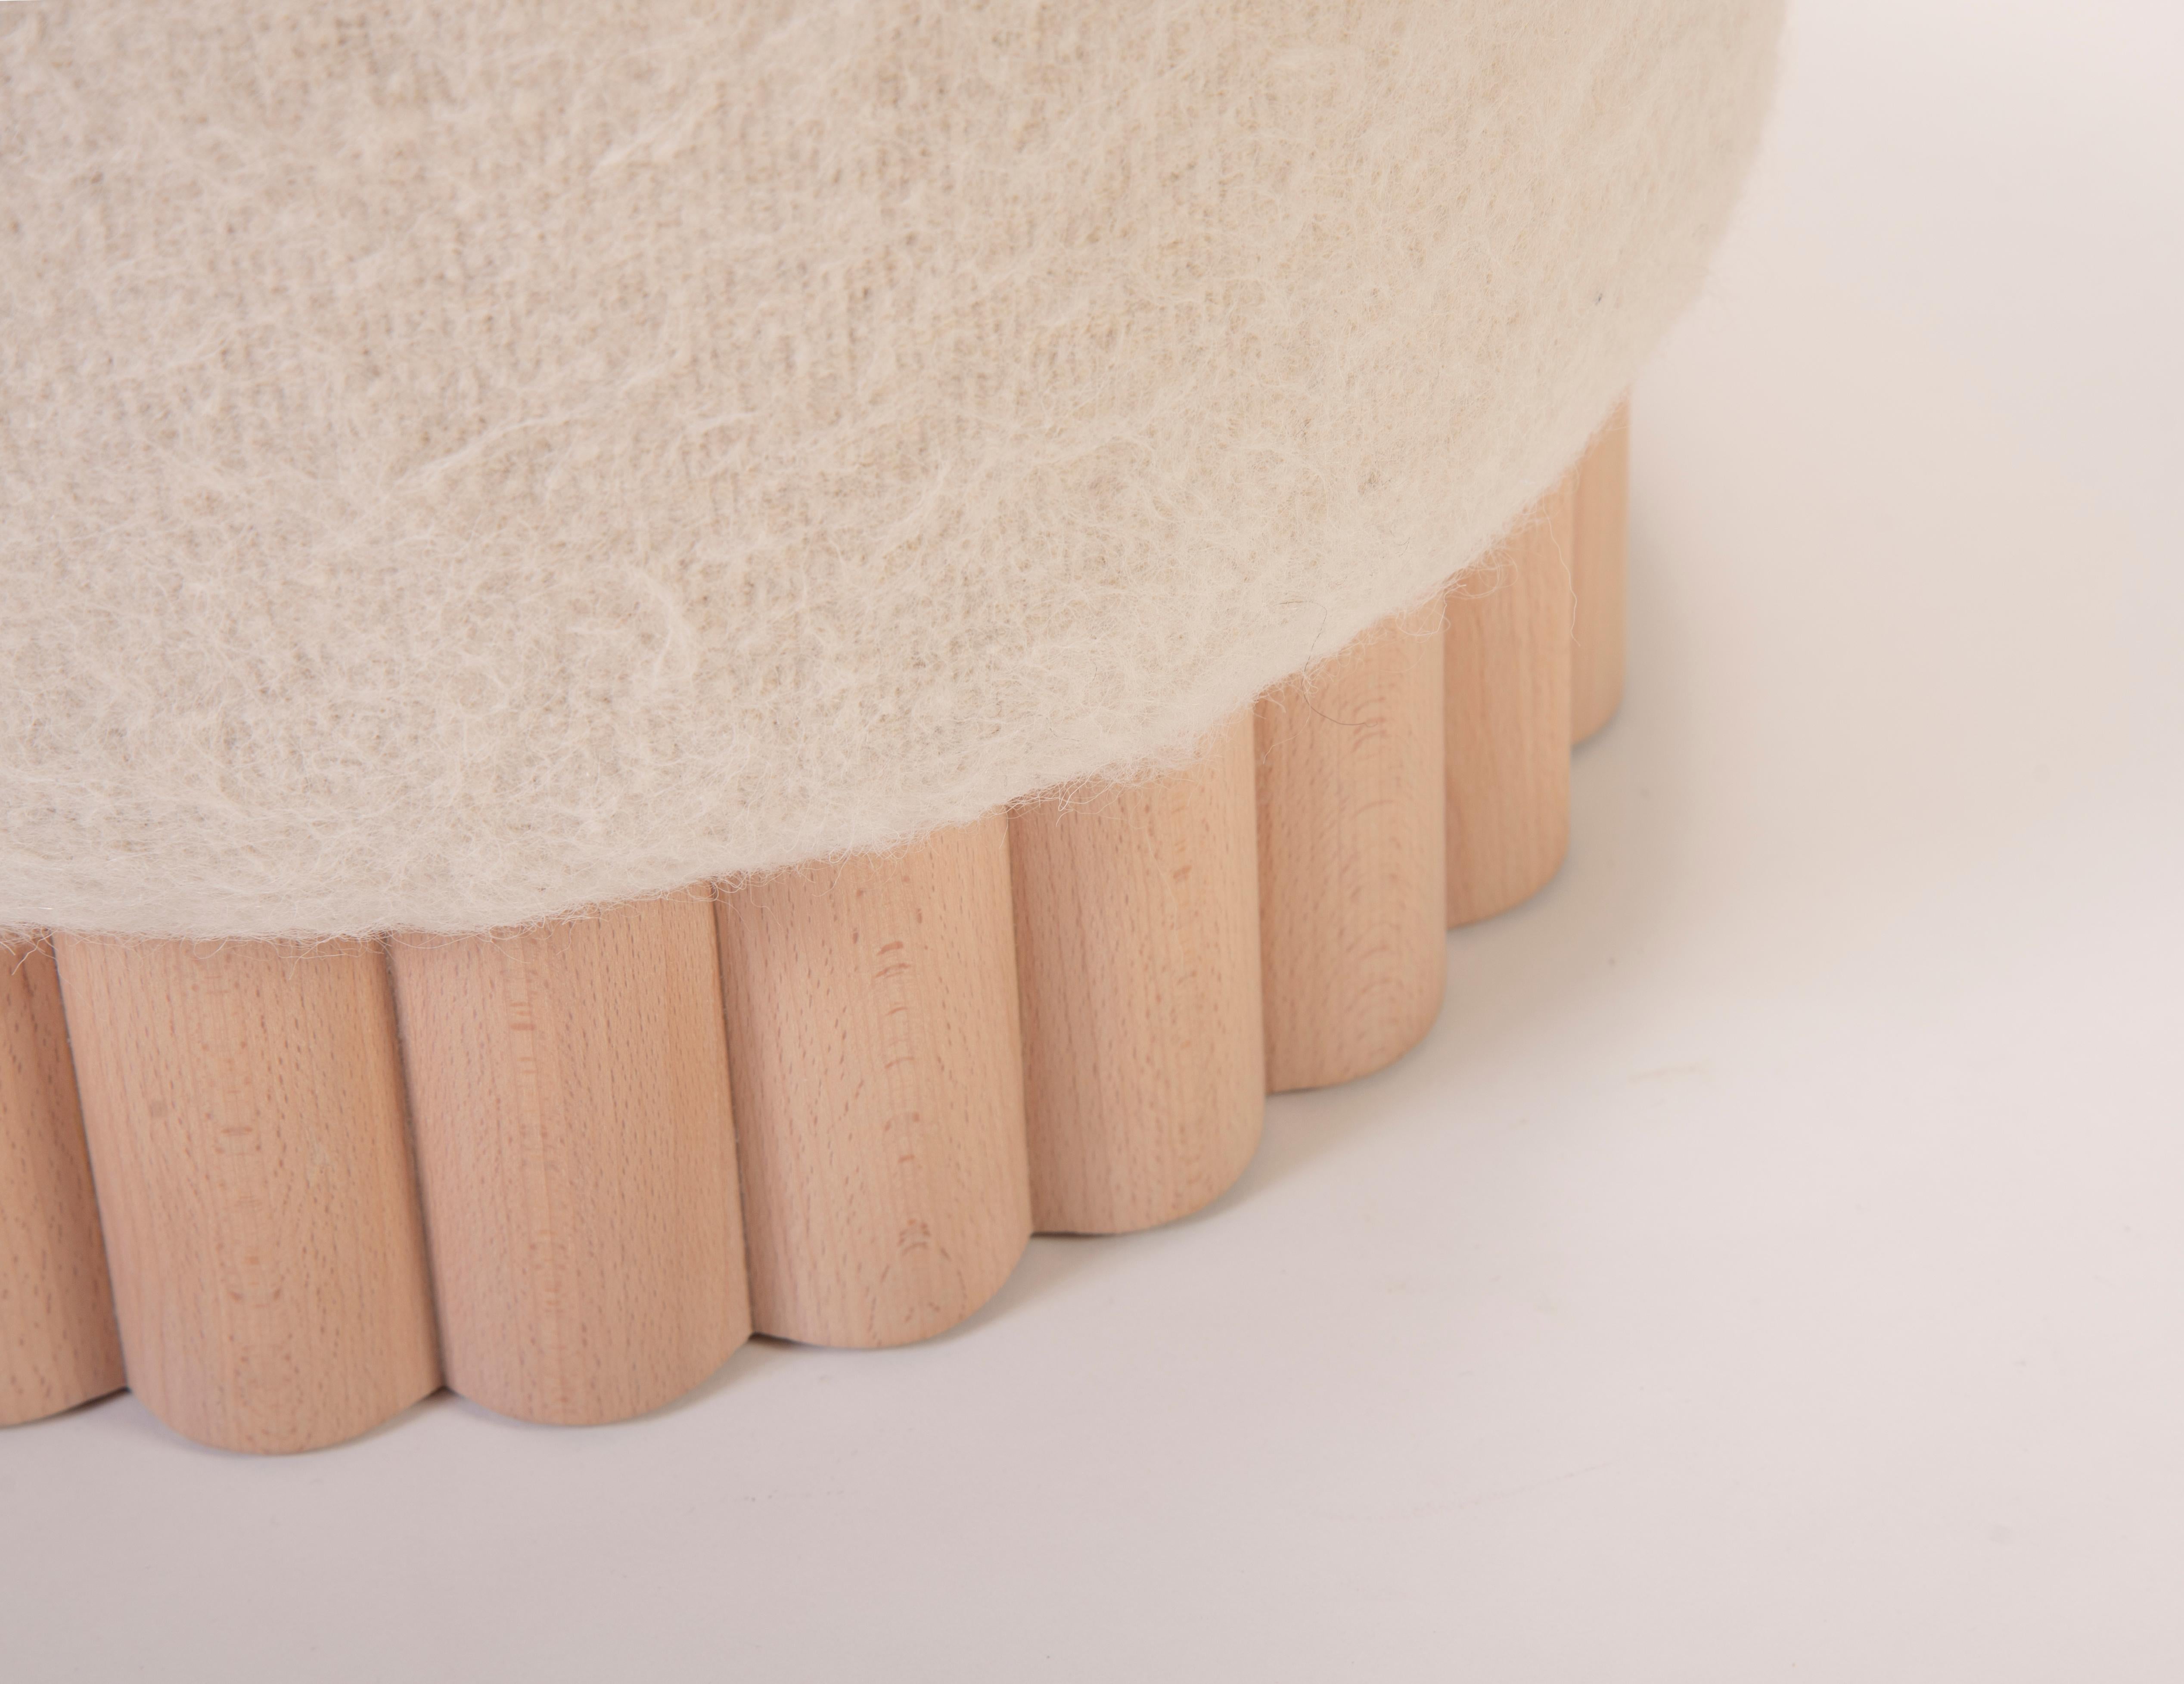 Upholstered with a choice of different types of fabrics such as Lambswool Cloth, Linen or the softness of Leather, our Loto pouf bares only the slightest peek of its wooden rod base, drawing attention to the contrast of the two different